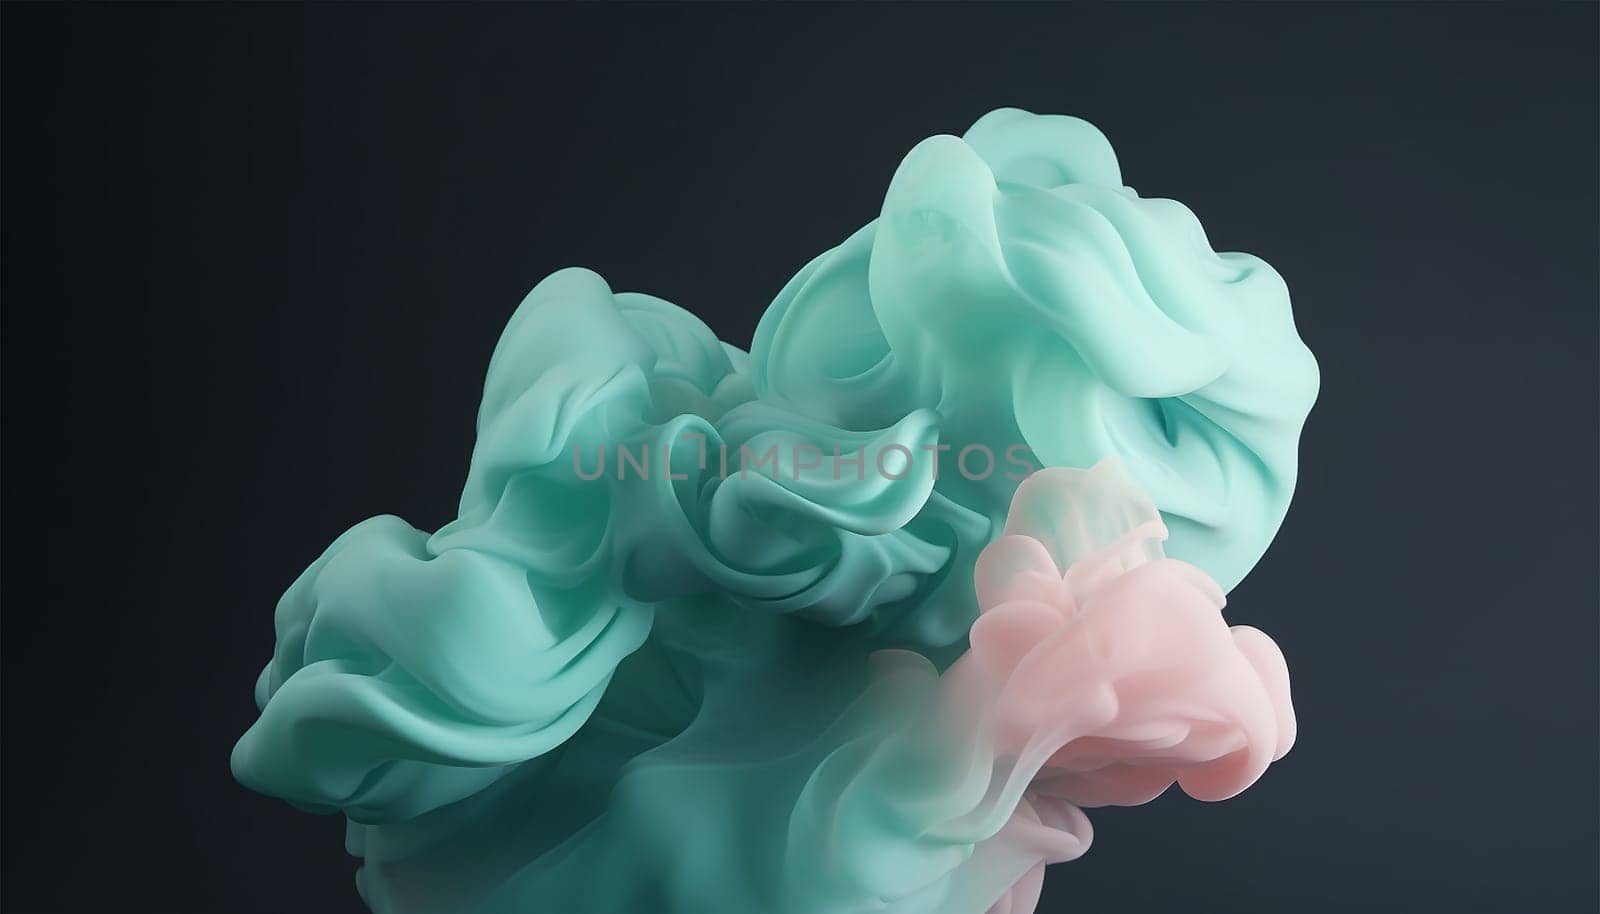 Realistic 3D smoke cloud pastel colored green and pink. 3d realistic clouds set isolated on a dark background. Render soft round cartoon fluffy clouds icon in the sky. 3d geometric shapes illustration by Annebel146